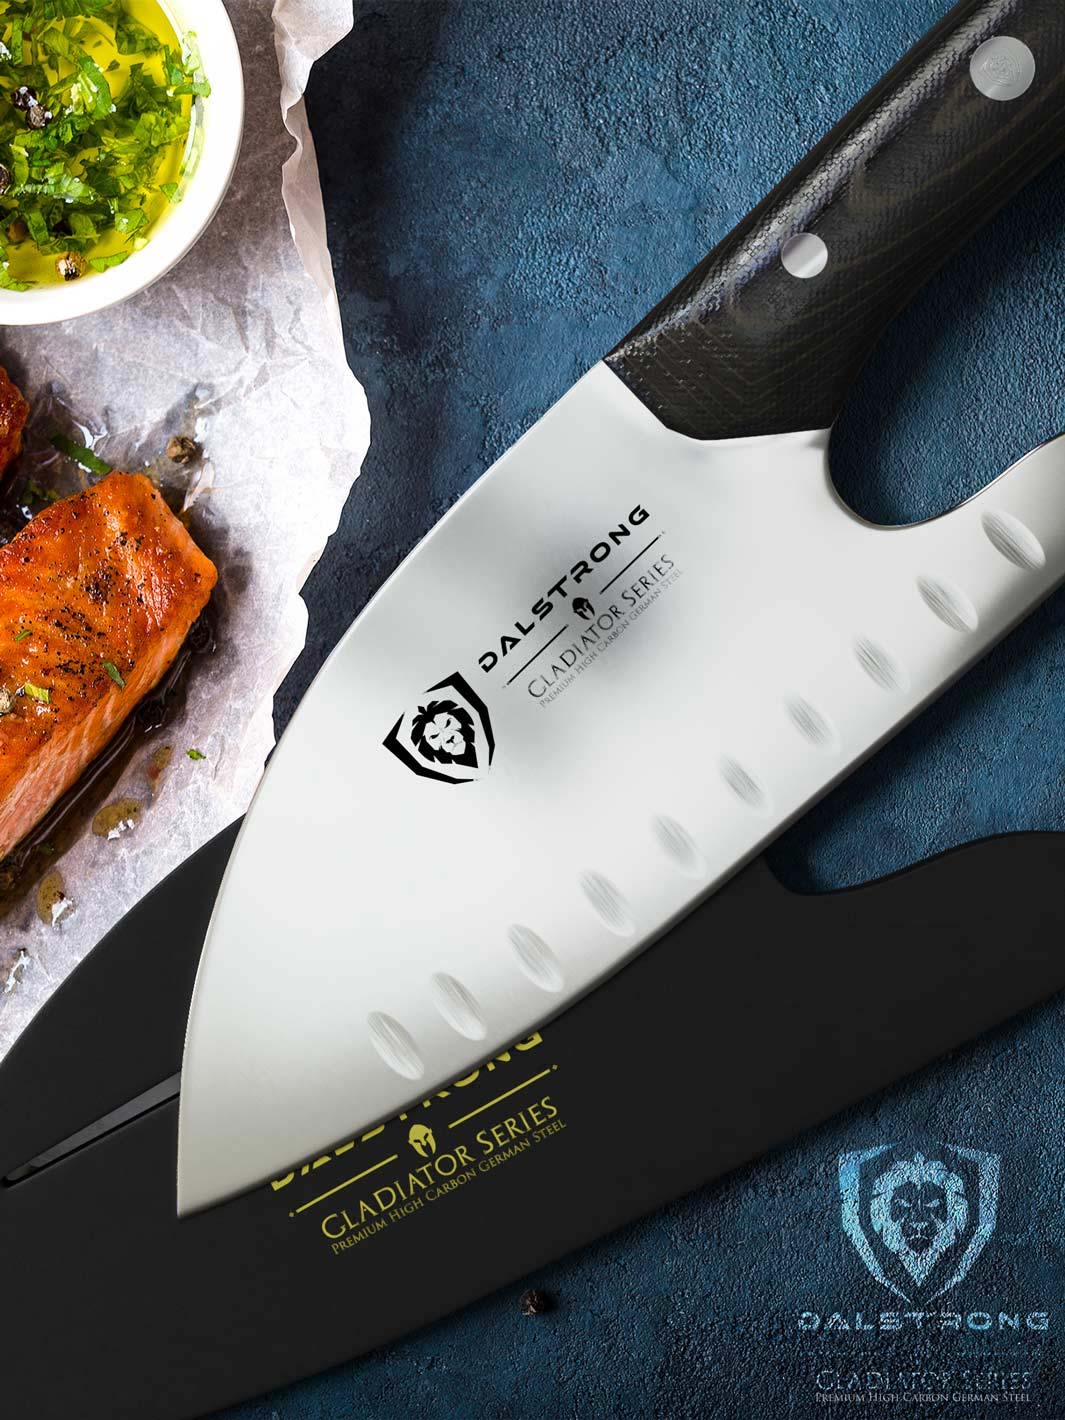 Dalstrong gladiator series 8 inch guardian chef knife with black handle and sheath beside a cooked salmon fillet.